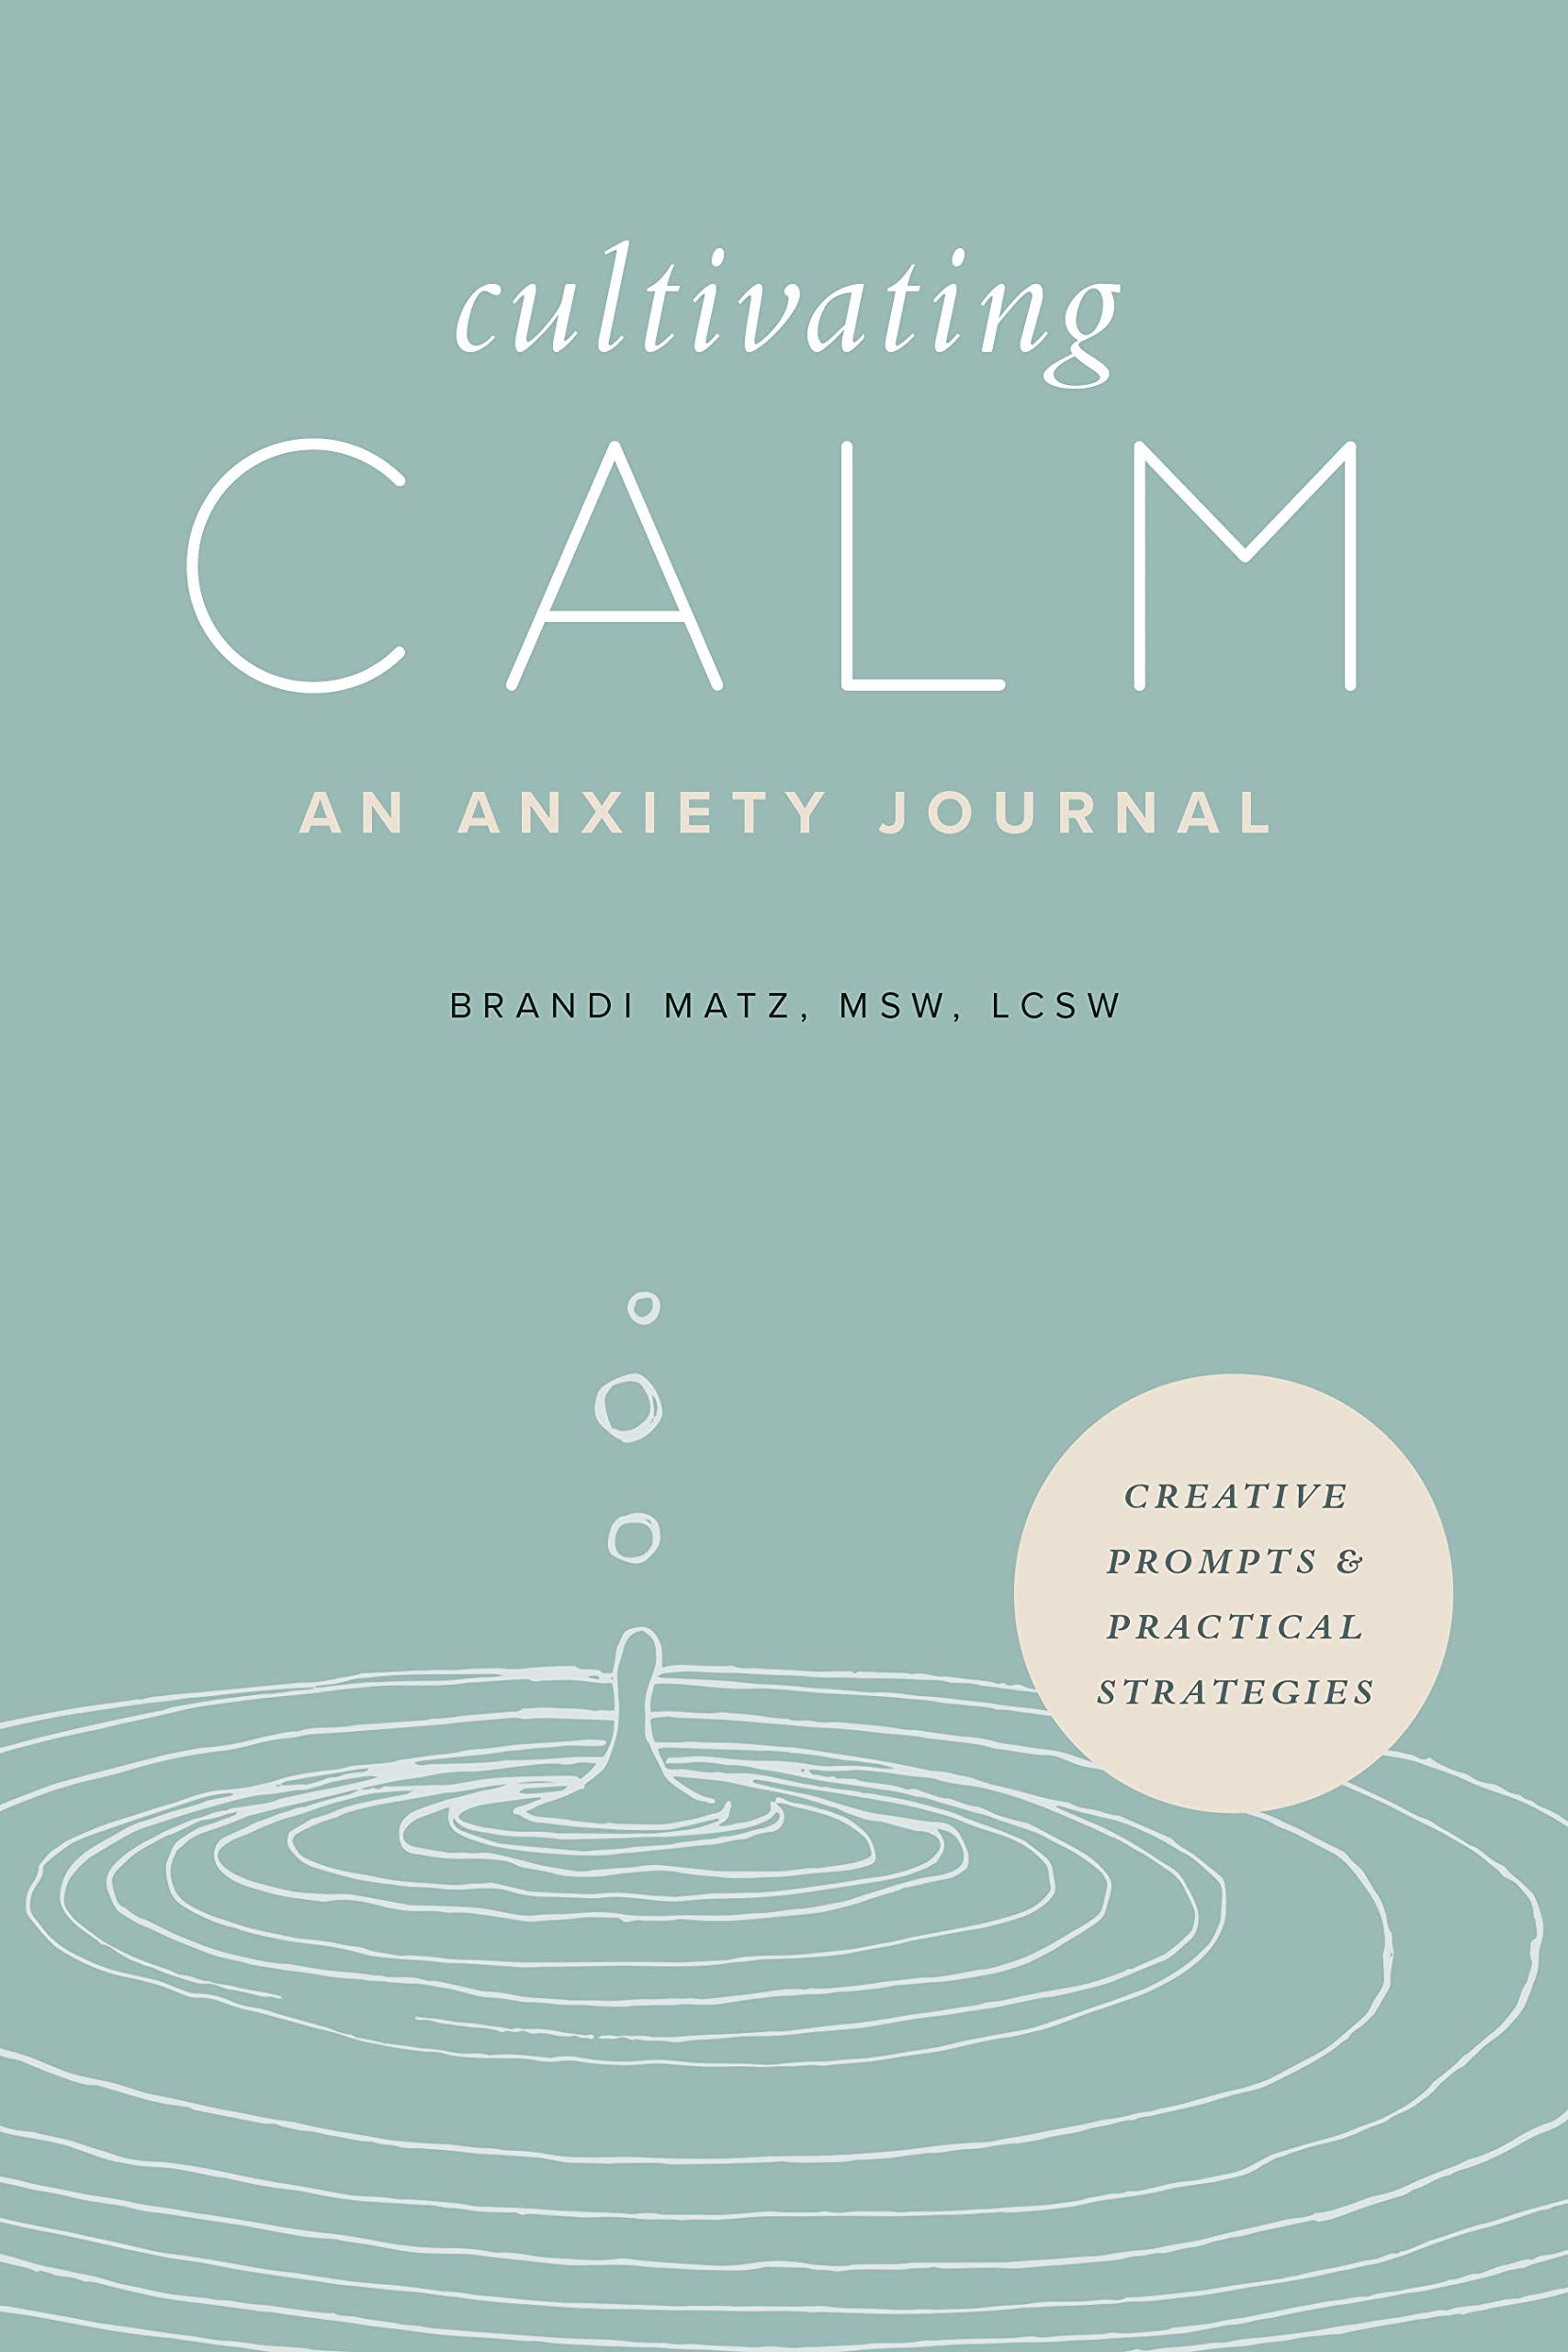 Cultivating Calm: An Anxiety Journal